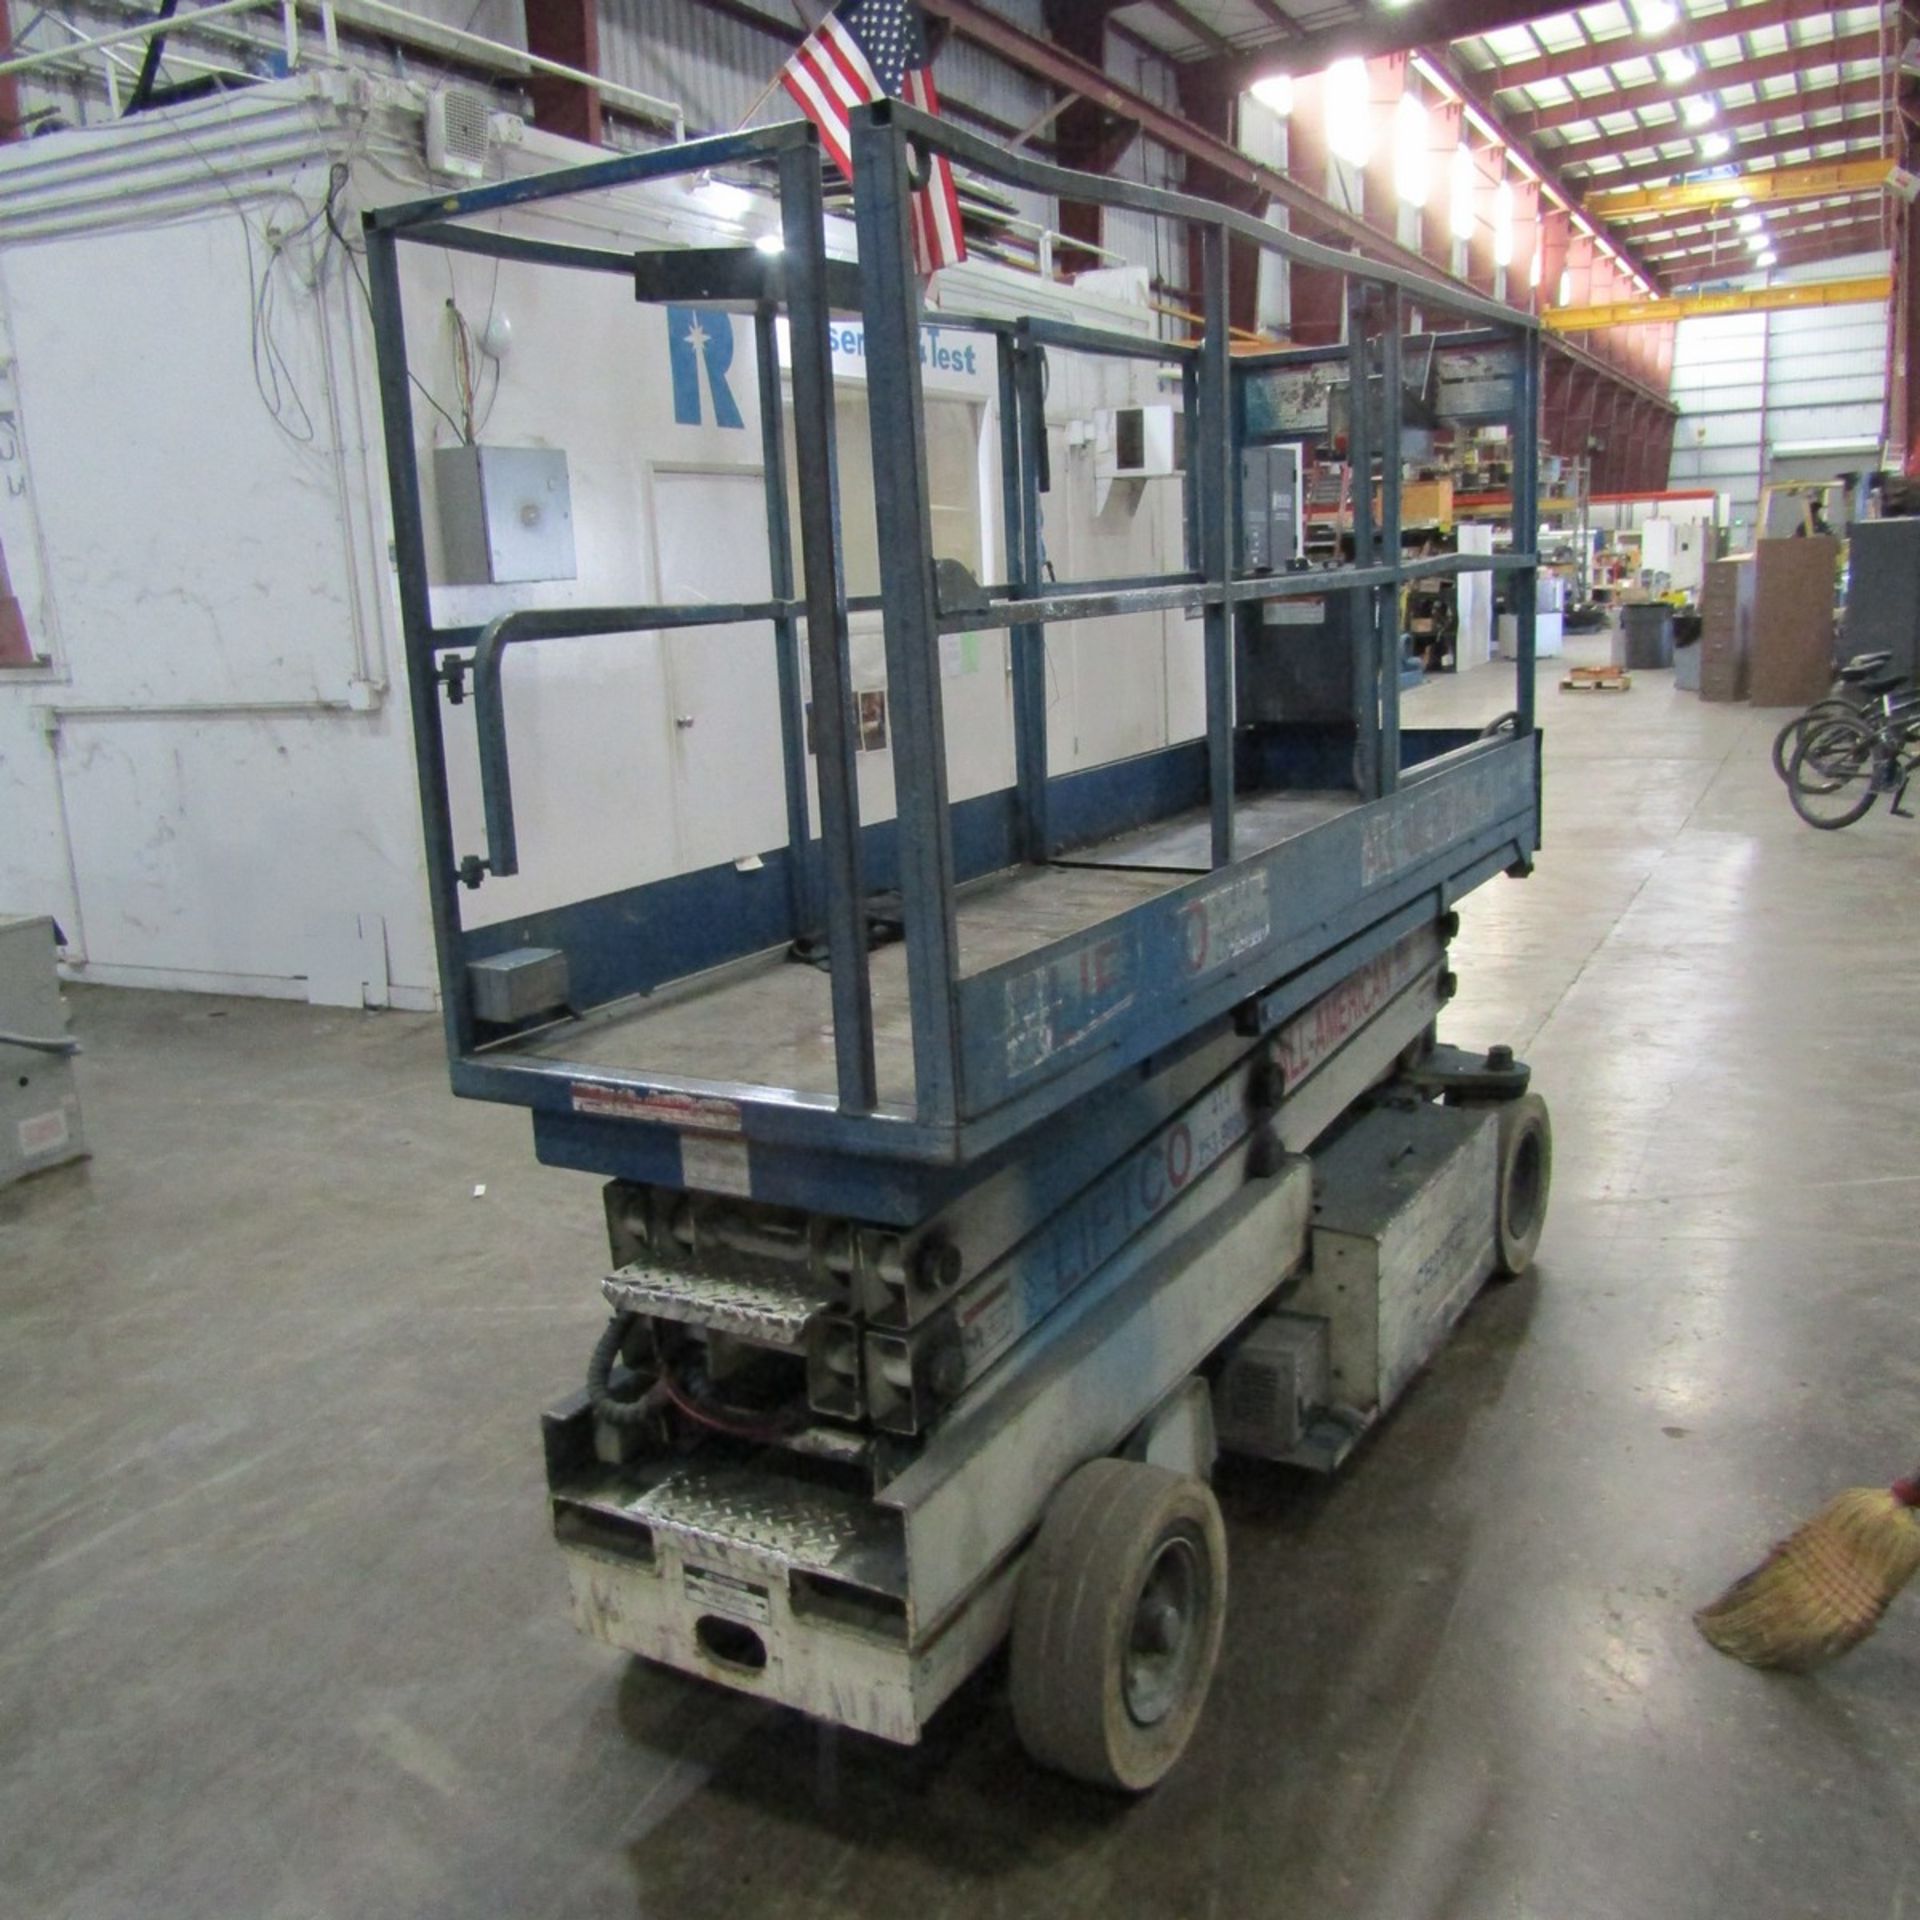 Mark Industries, Mdl: Marklift CH20NEP Scissor Lift 800 lb. Cap. 20' Travel Height,, S/N: 25303 - Image 4 of 6